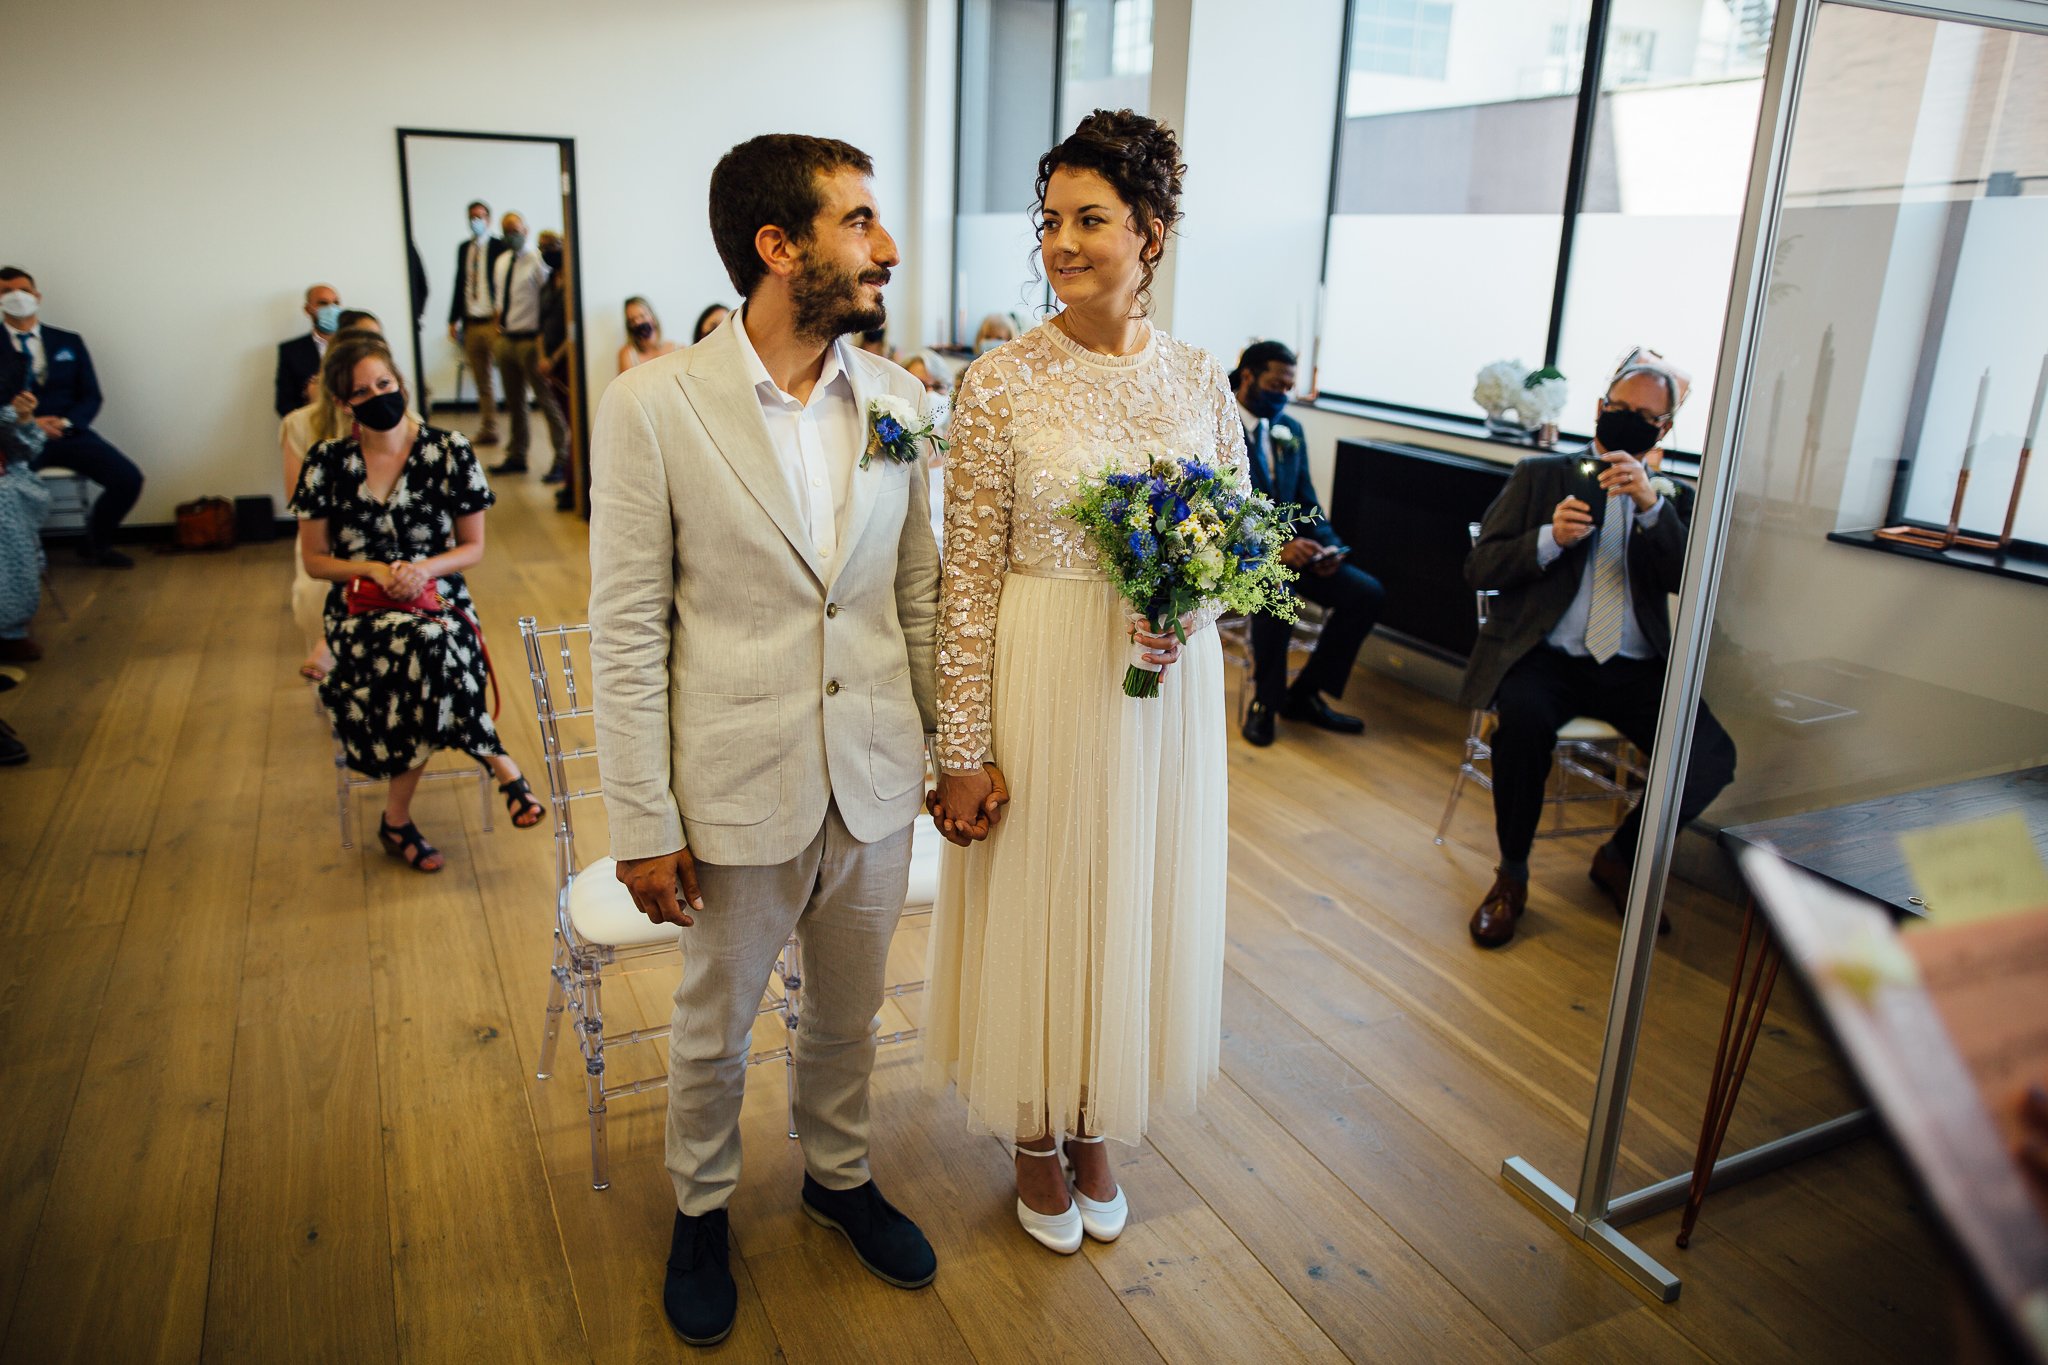  Bride and Groom during the ceremony at Hammersmith Register Office. 